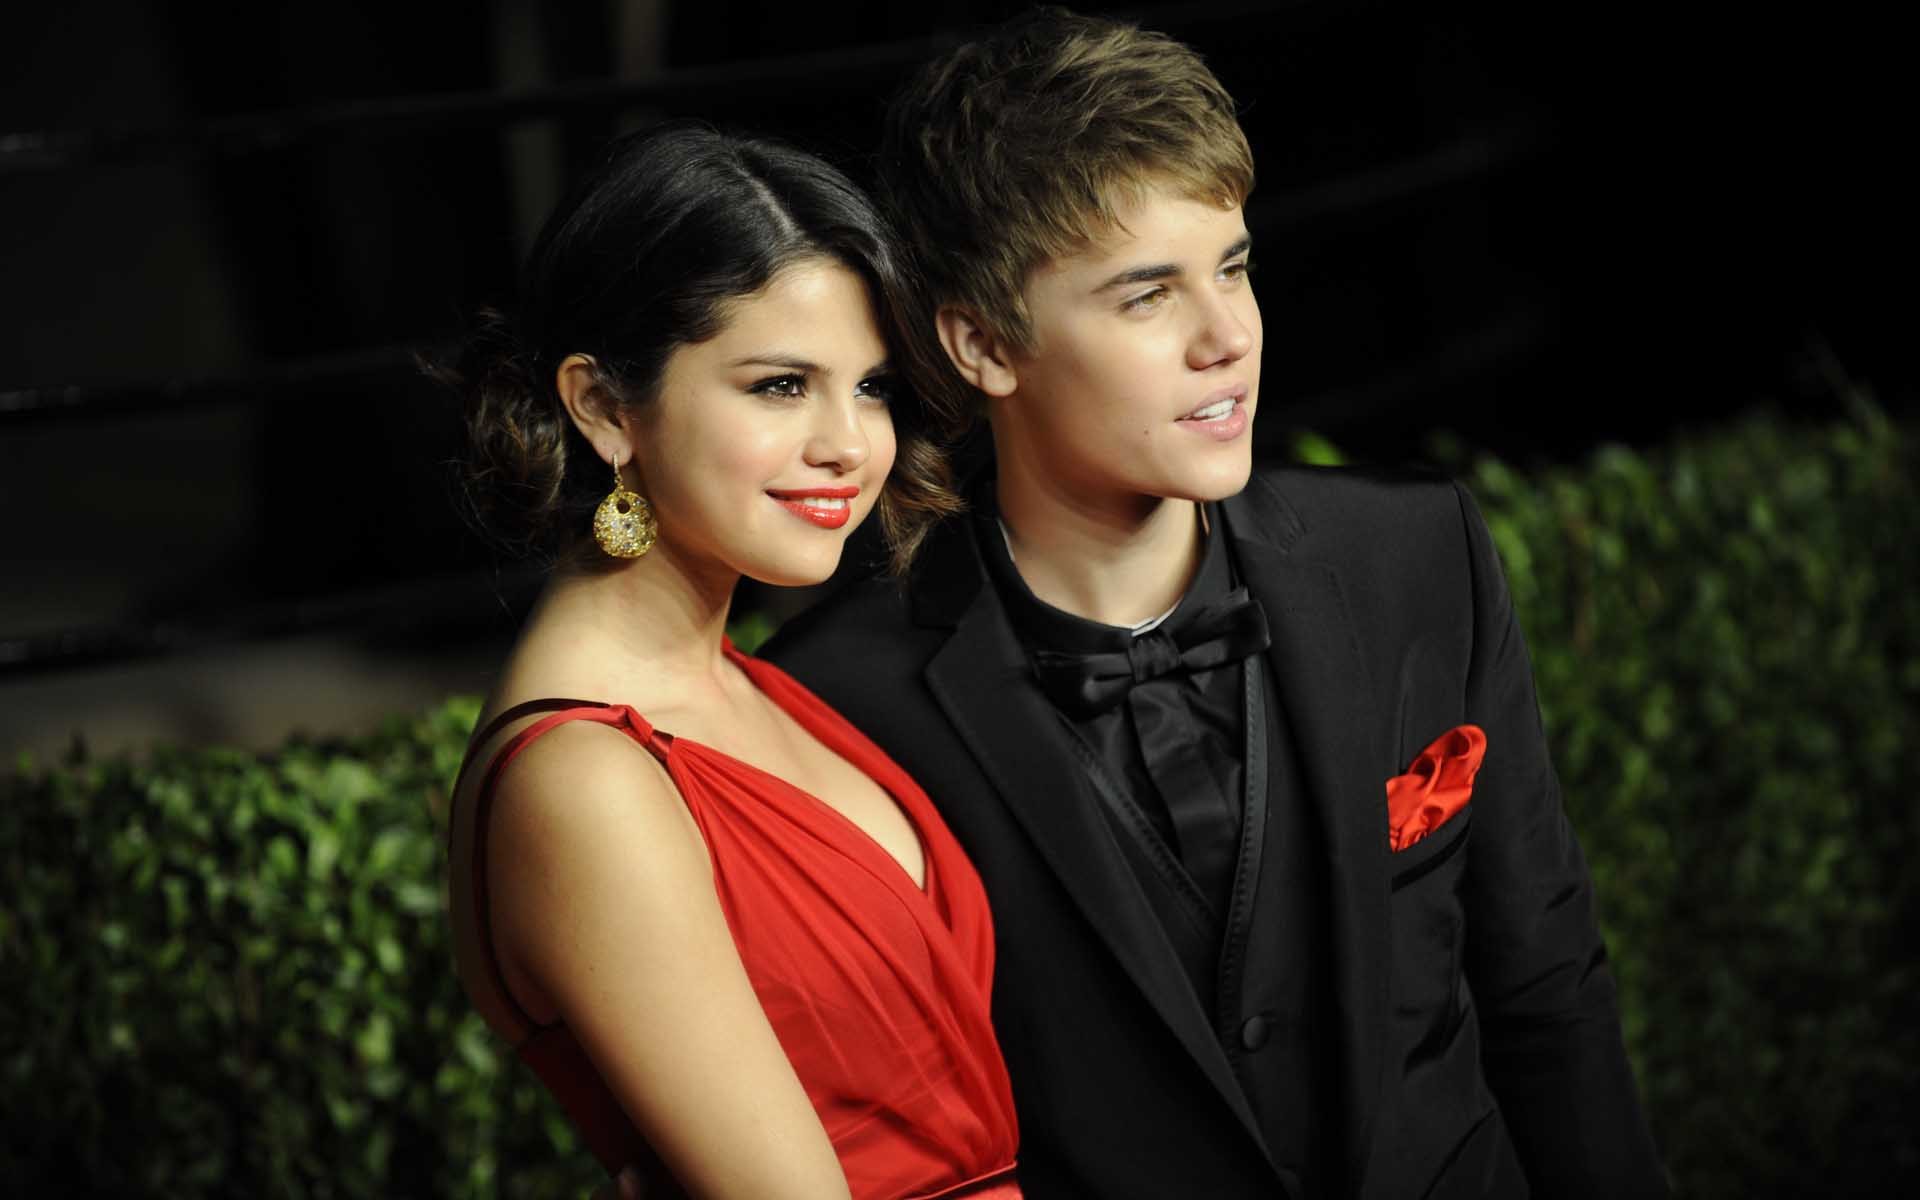 1920x1200 Lost Love photos of Justin Bieber and Selena Gomez so Cute